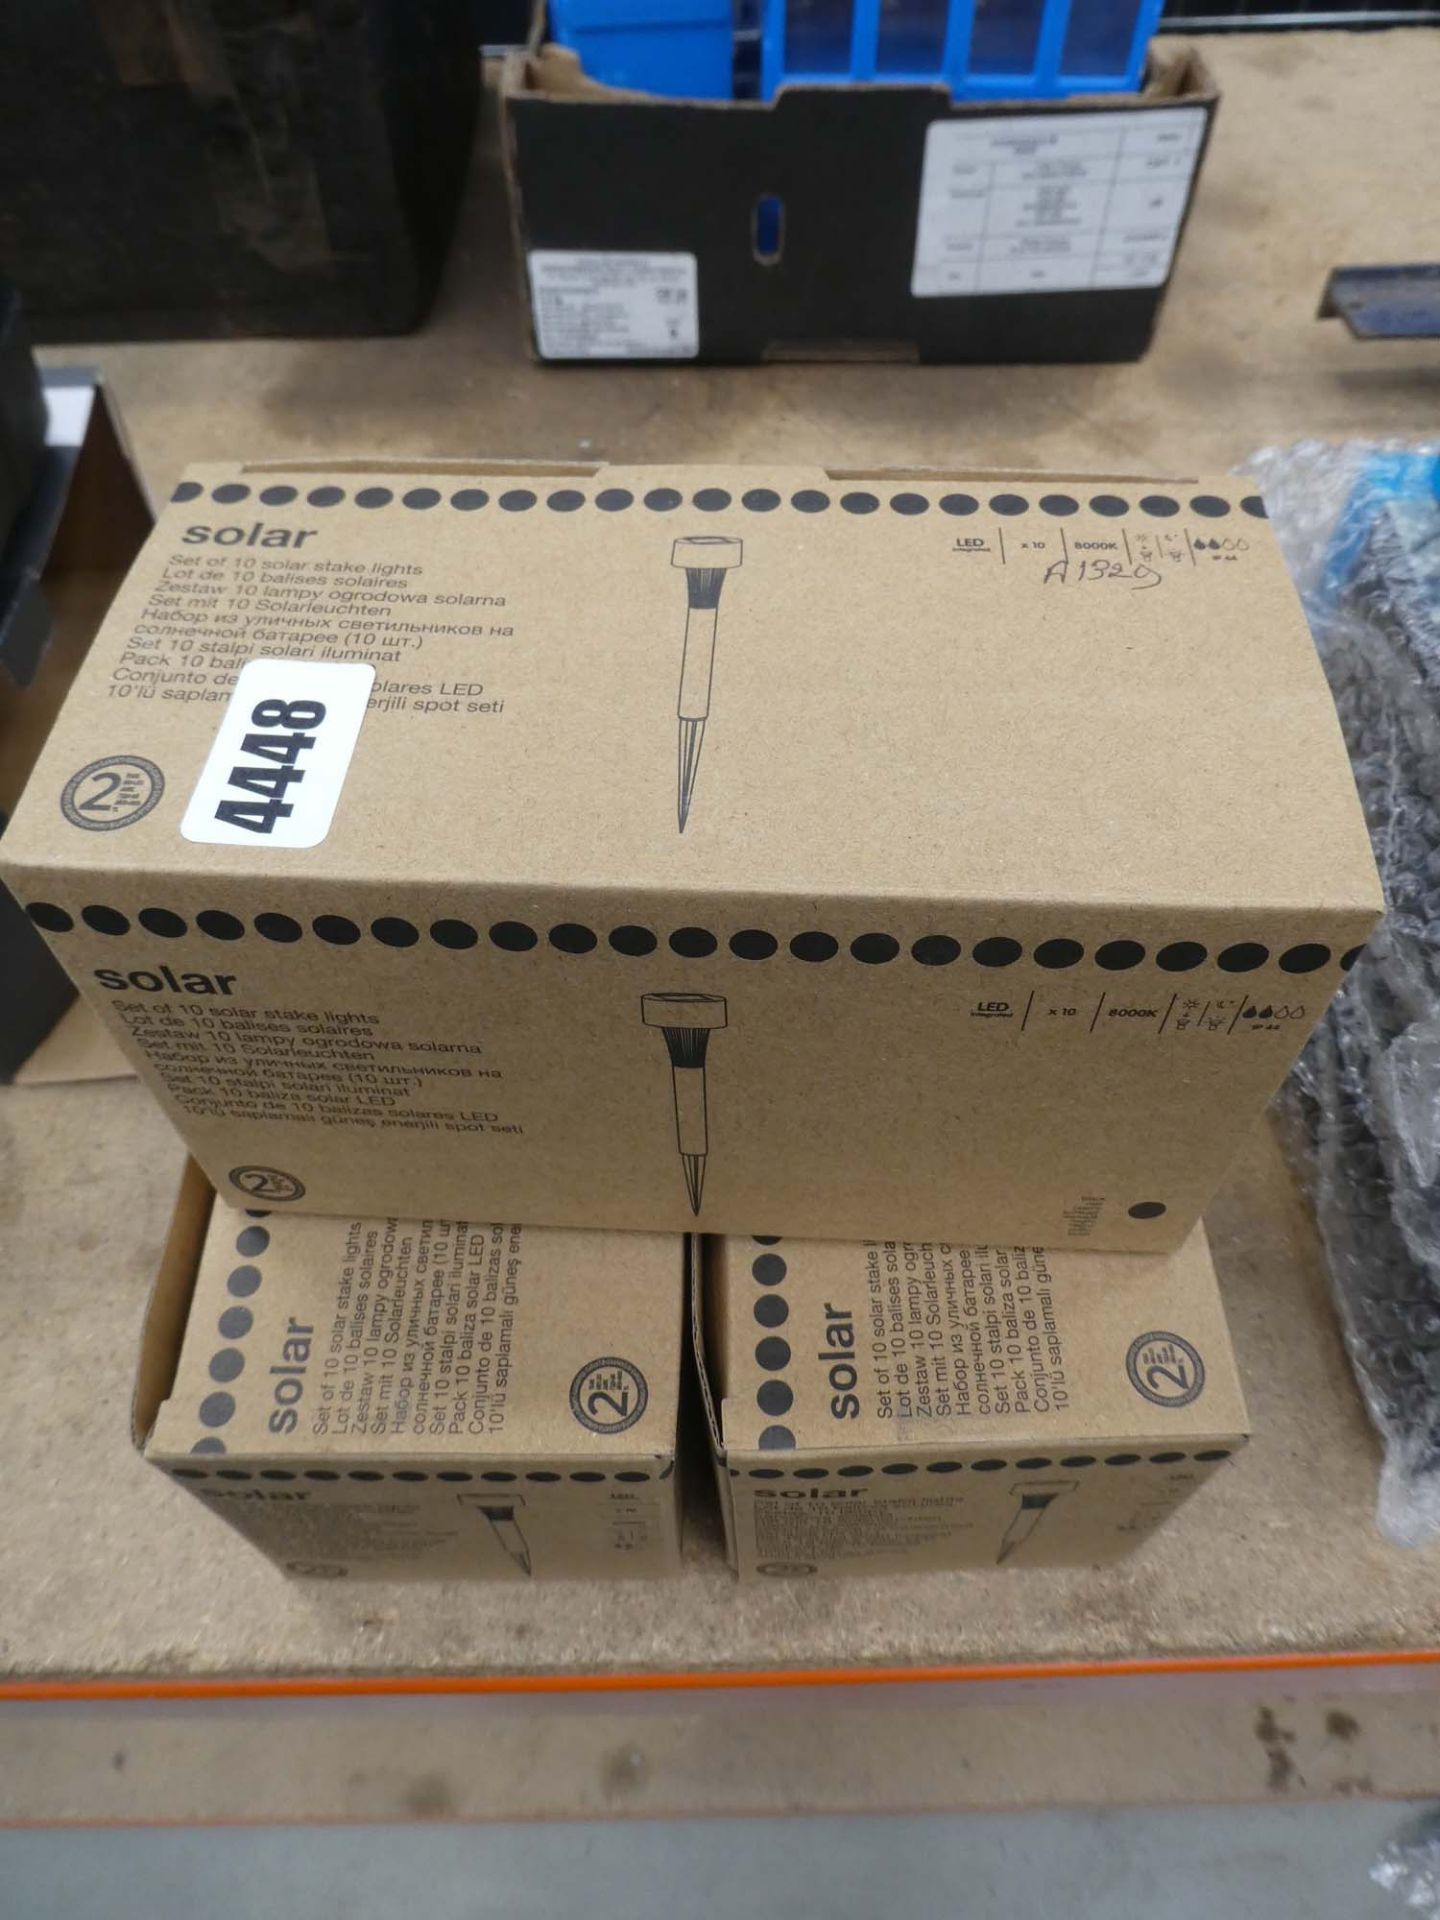 3 boxes of solar lights